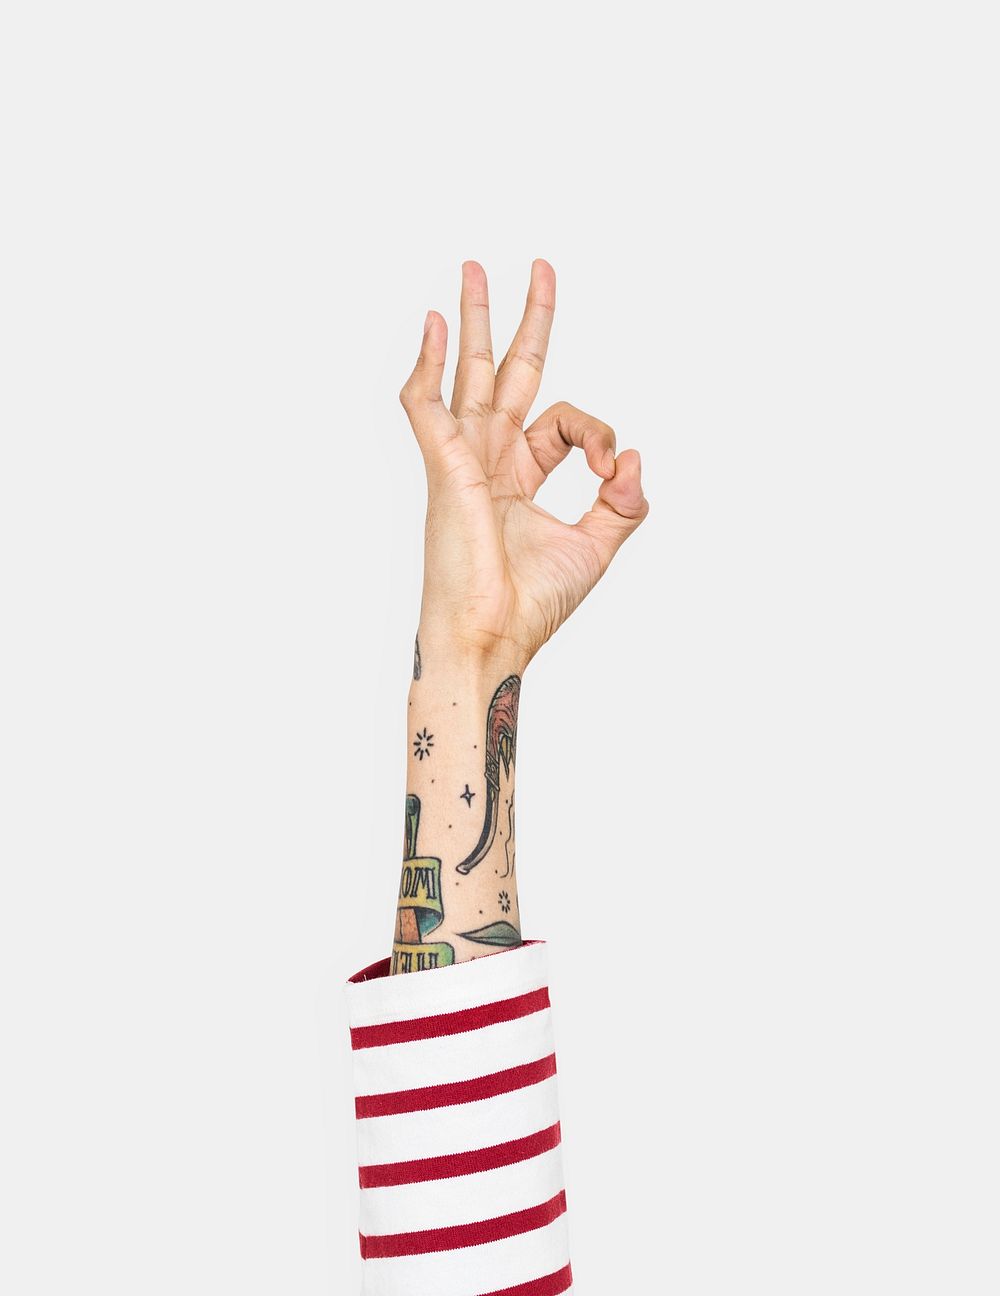 Hand showing A-Ok gesture